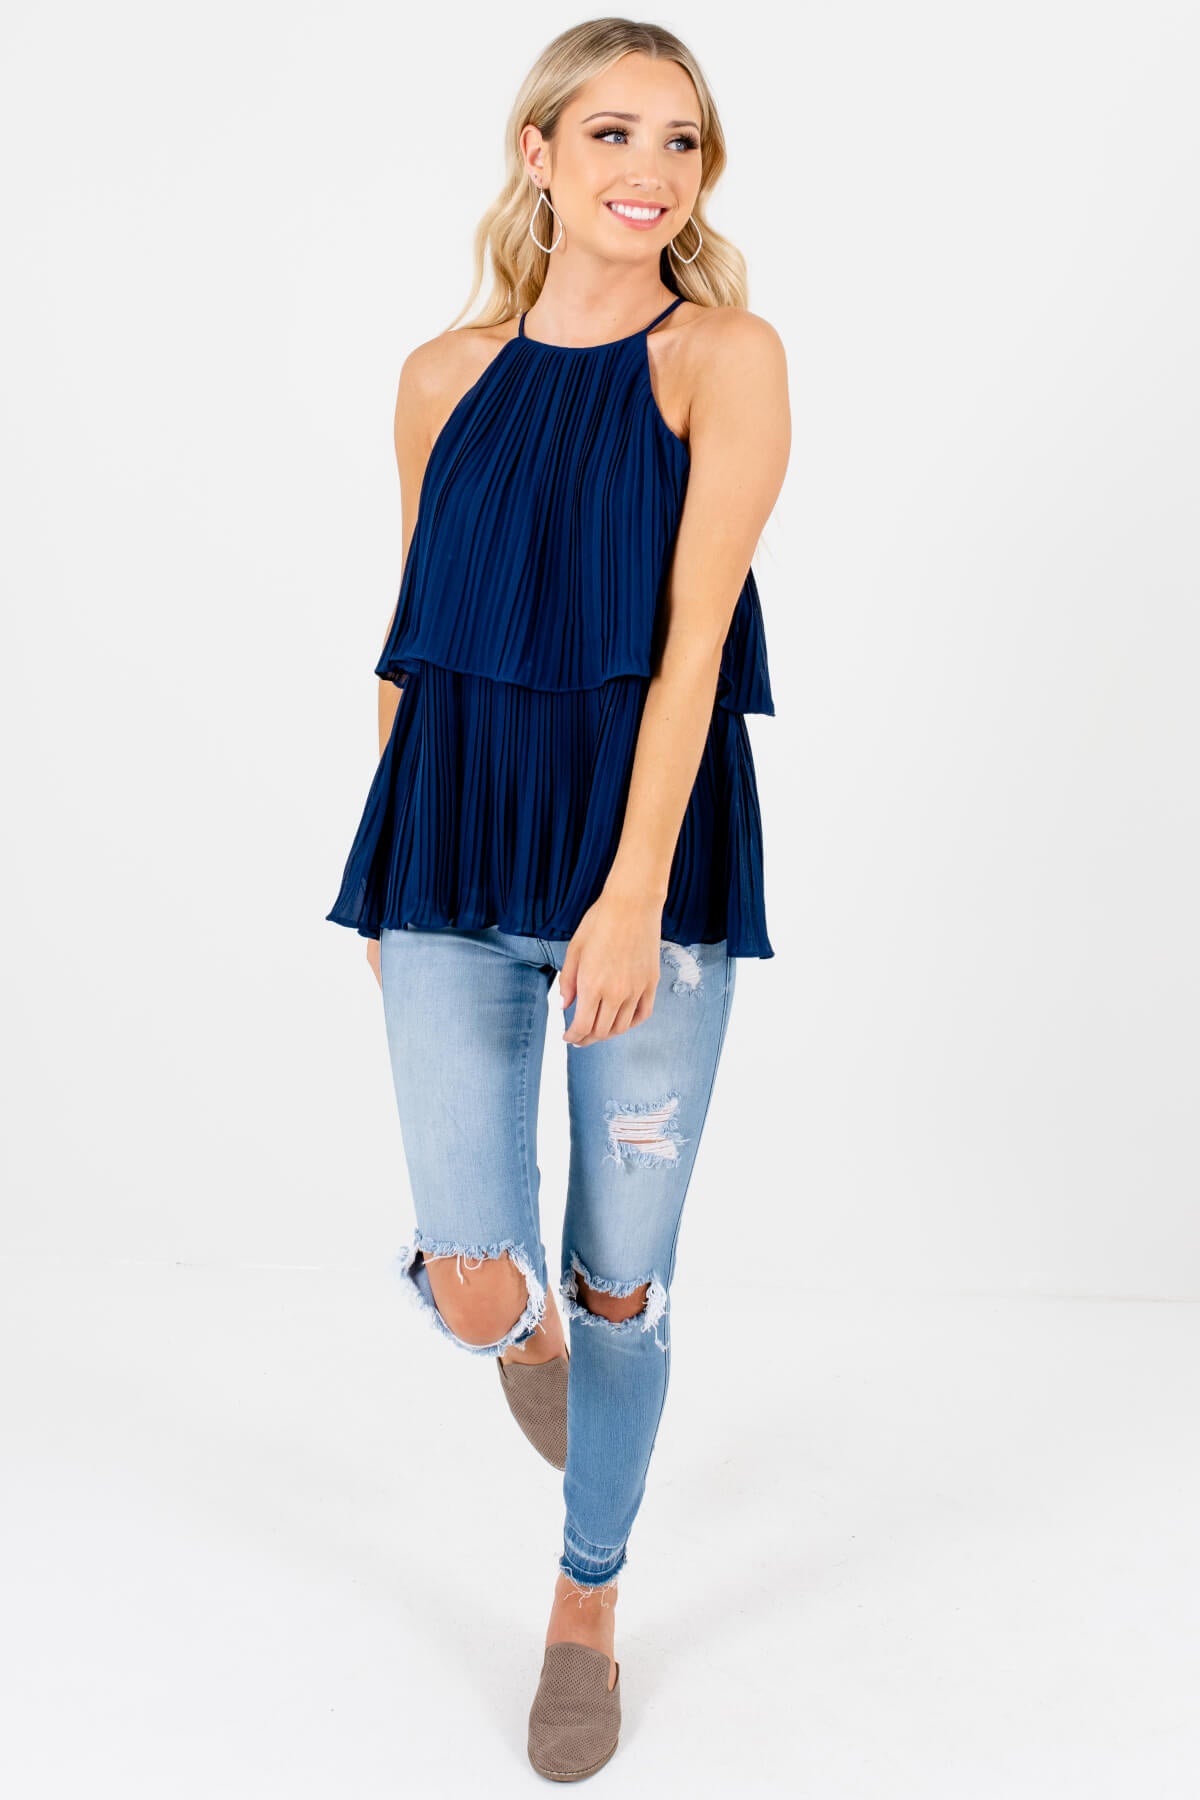 Navy Blue Halter Pleated Tank Tops Affordable Online Boutique